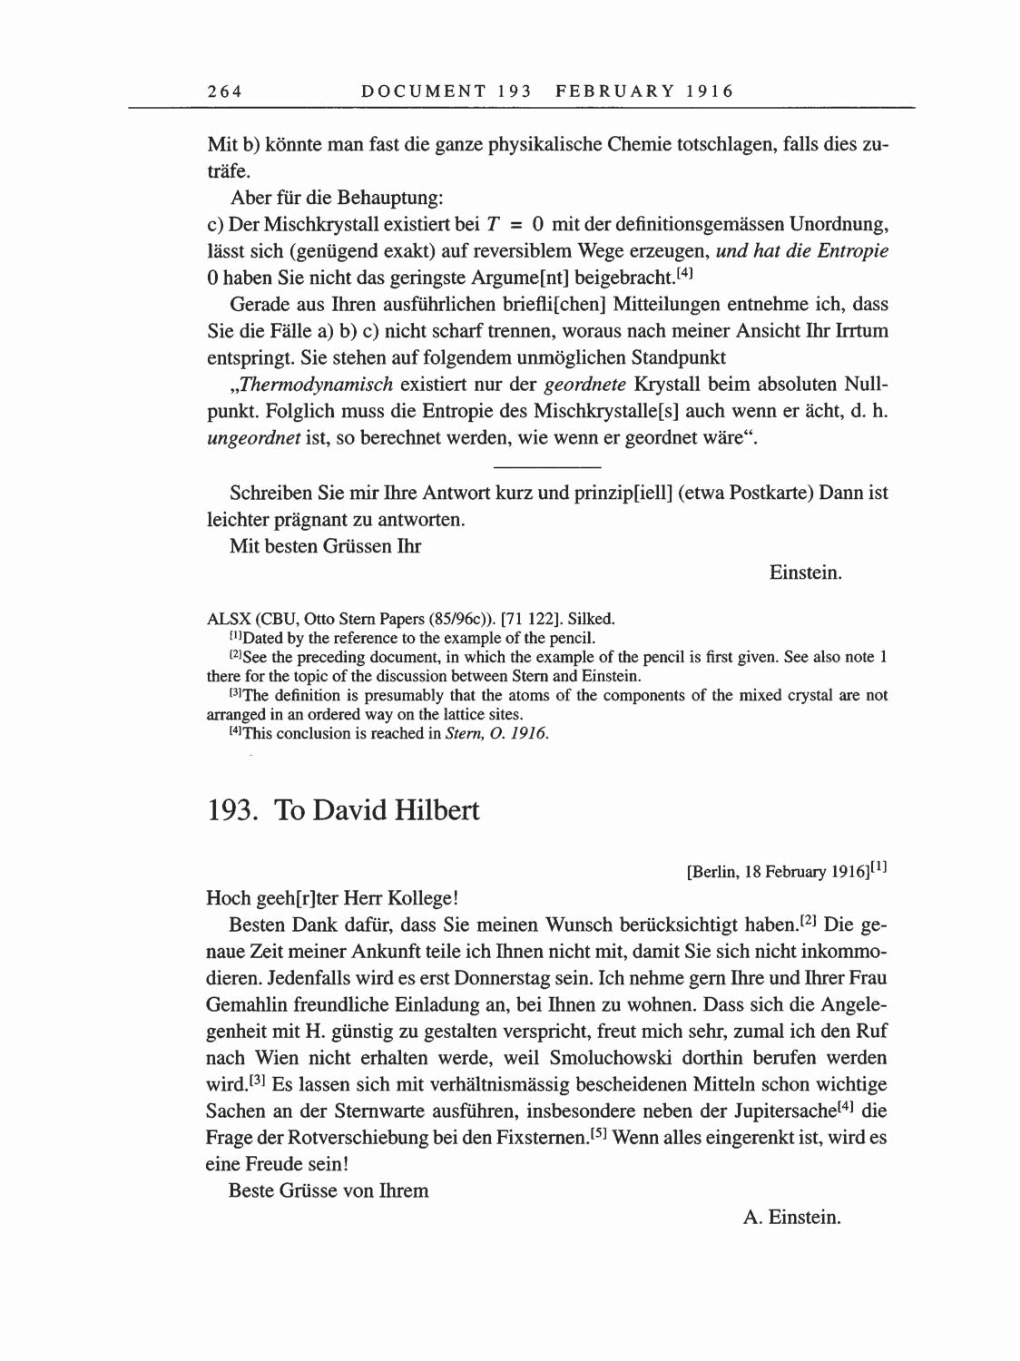 Volume 8, Part A: The Berlin Years: Correspondence 1914-1917 page 264